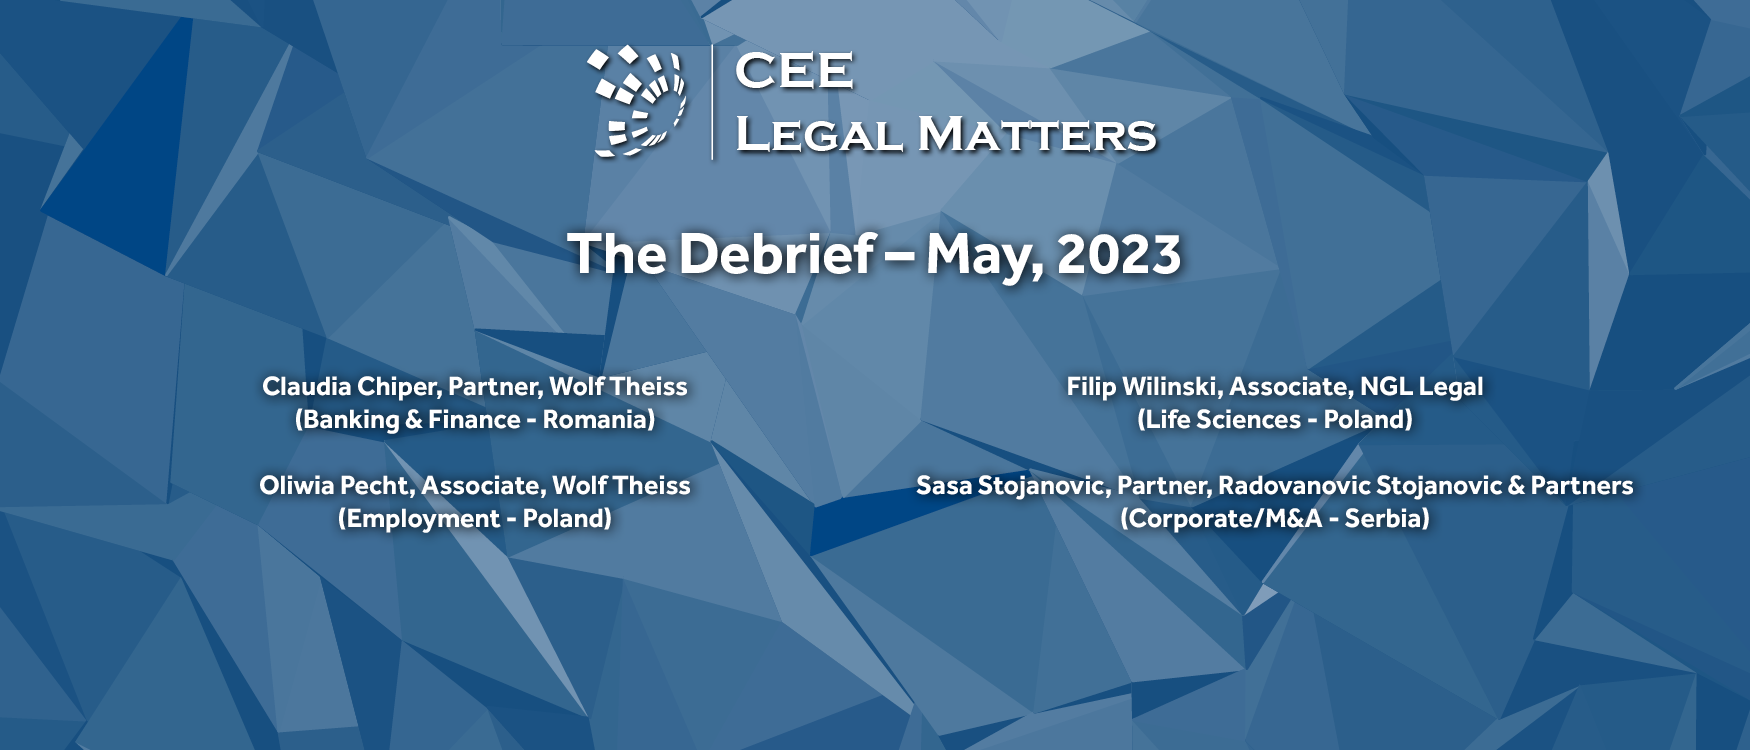 The Debrief: May 2023 